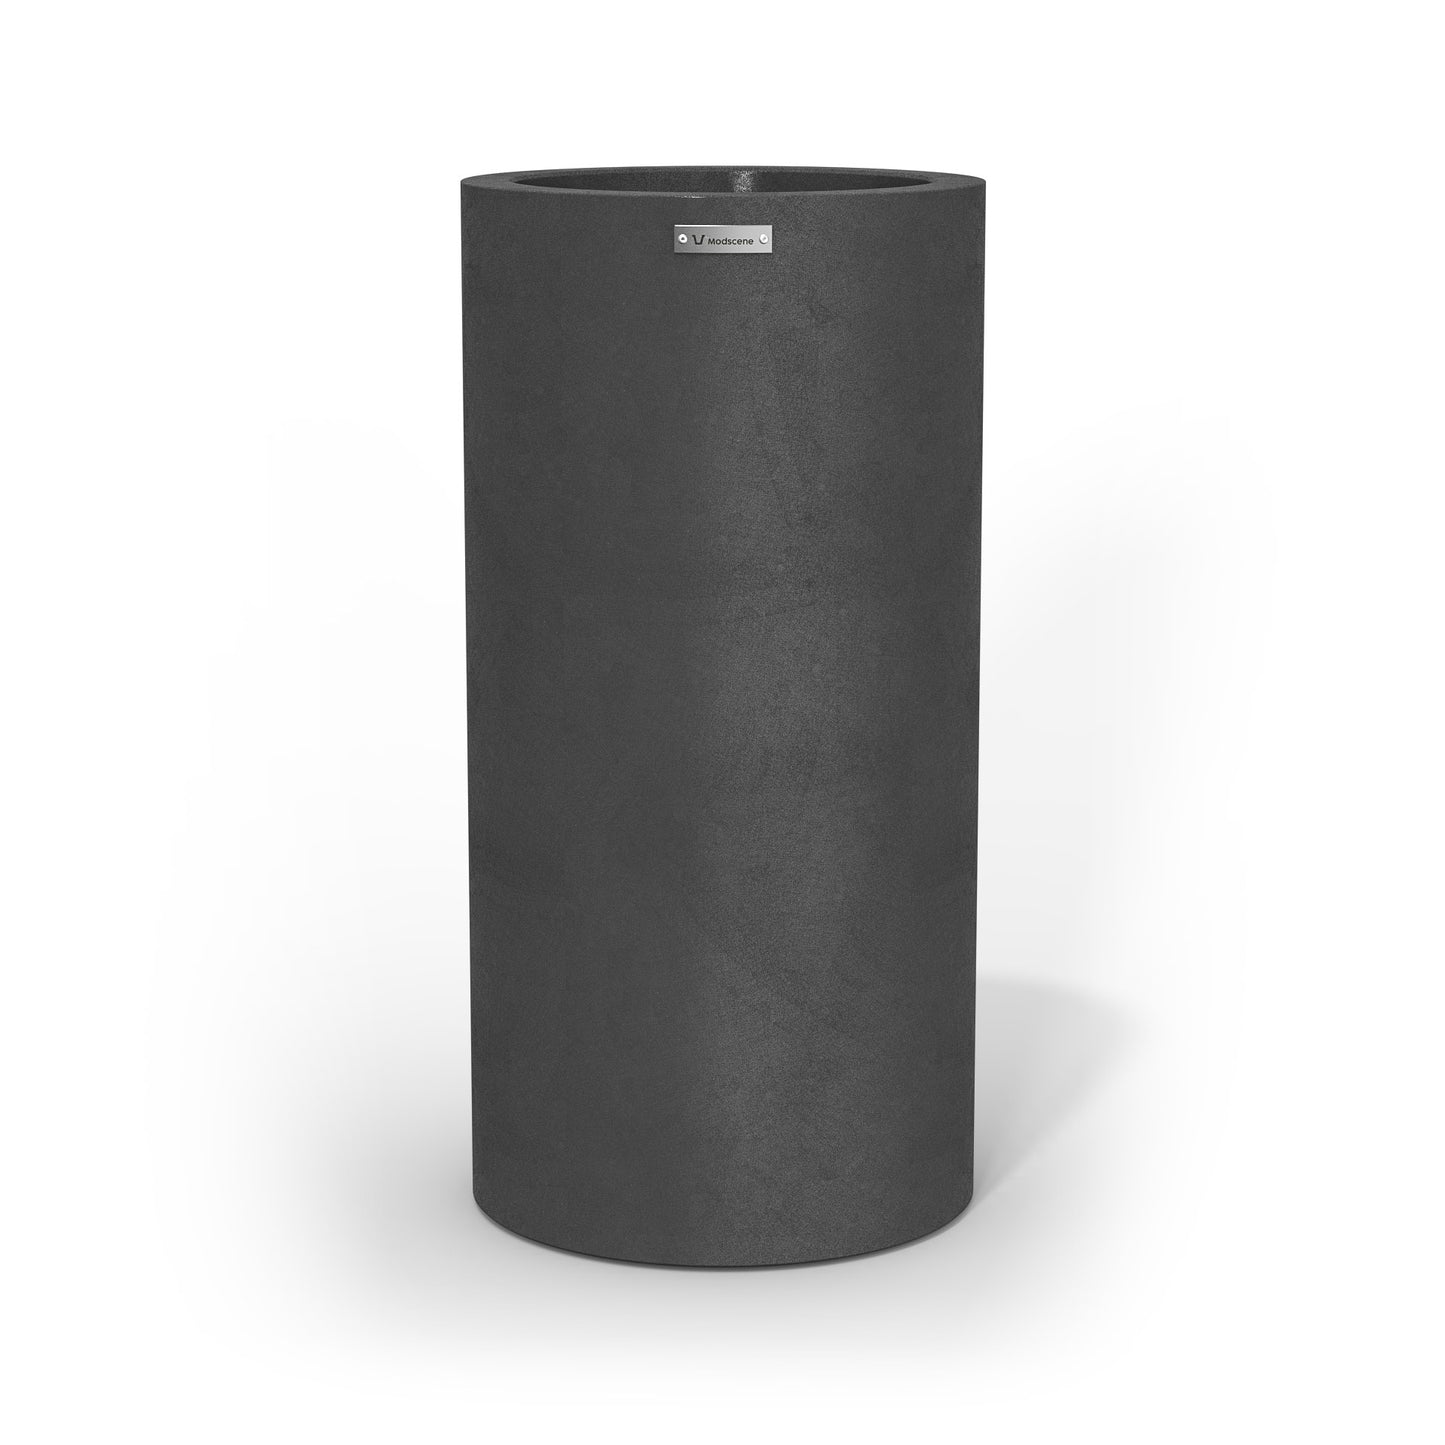 A tall cigar cylinder planter pot in a brushed grey colour made by Modscene.